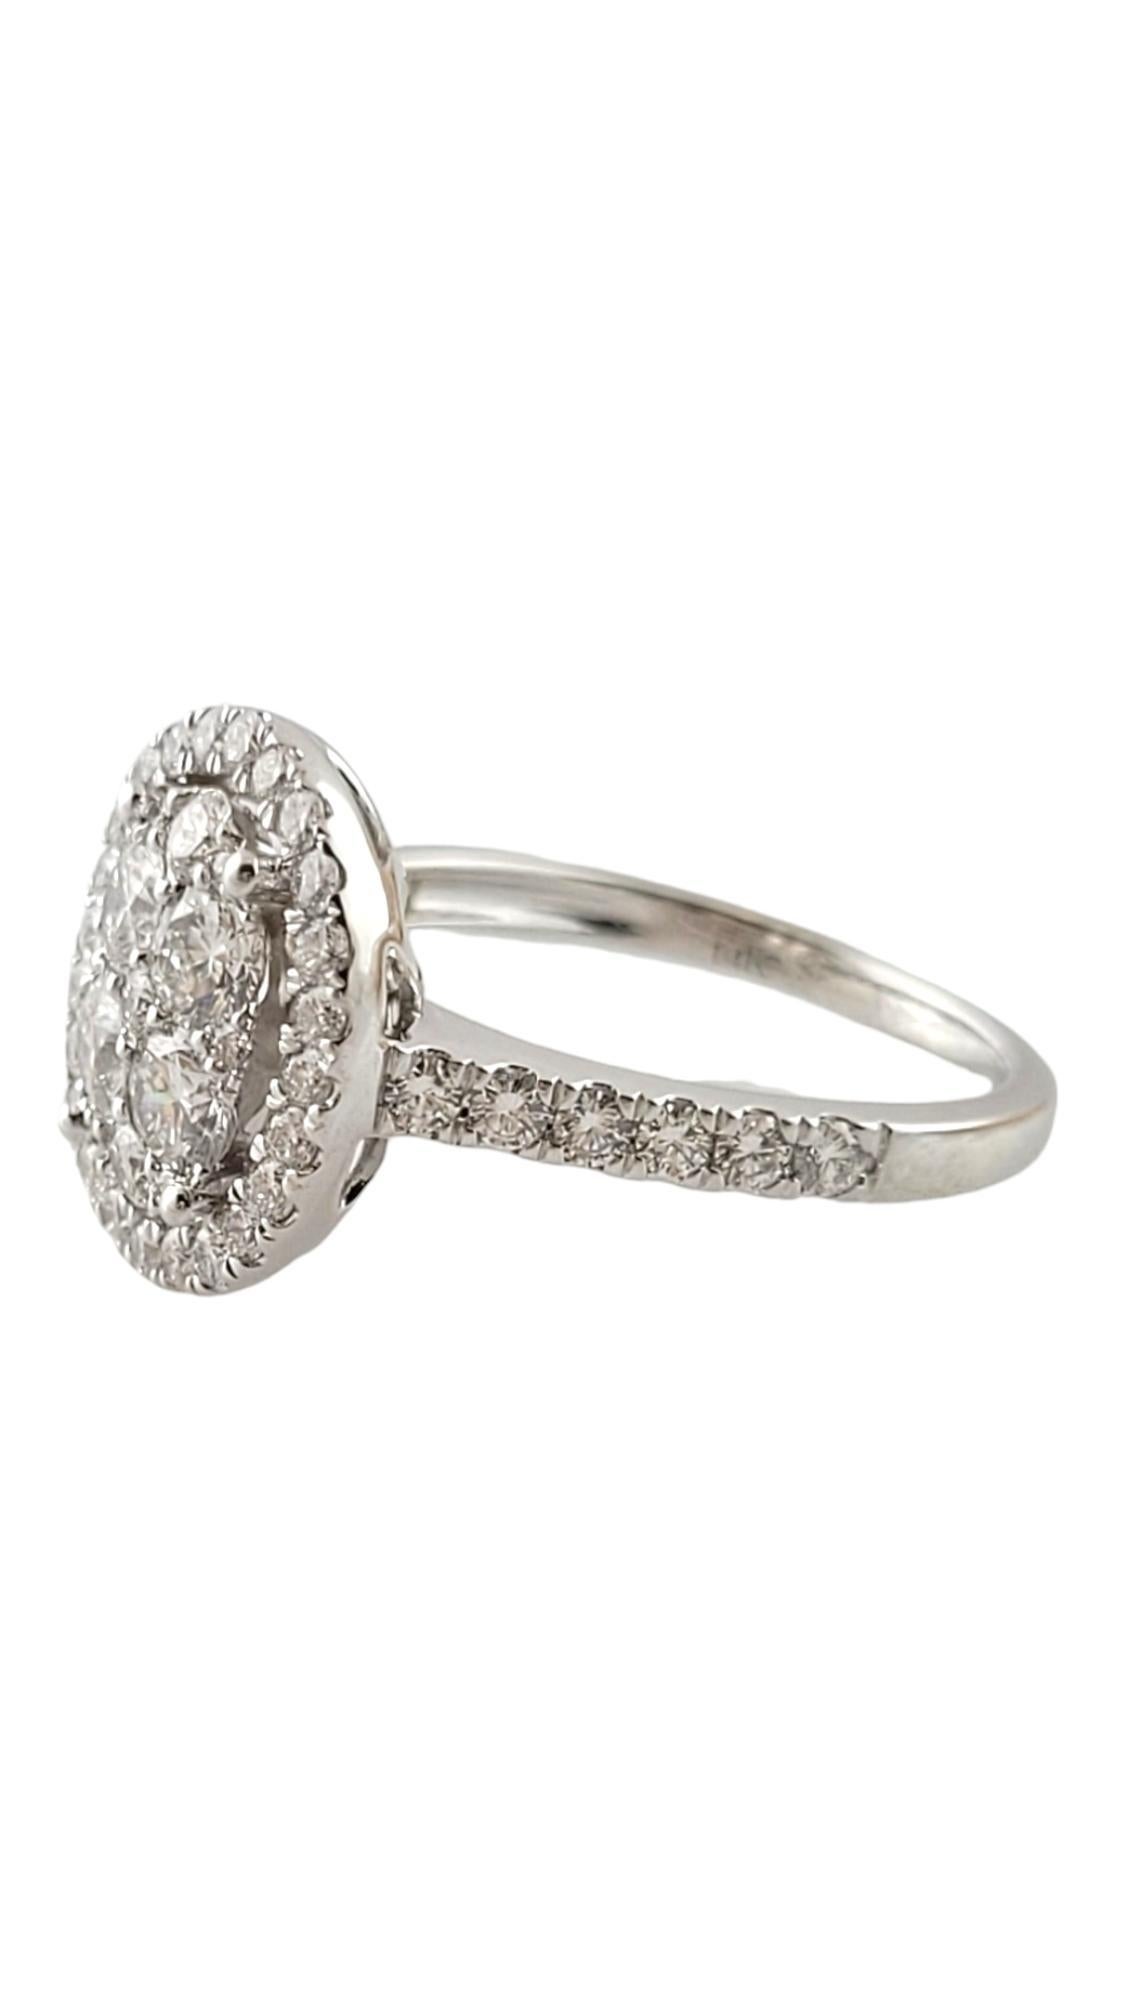 This sparkling cluster ring is decorated with round brilliant cut diamonds set in beautifully detailed 14K white gold.  

Top of ring measures 14 mm x 12 mm.  Shank:  2 mm.

Approximate total diamond weight:  1.41 ct.

Diamond color: E-F

Diamond